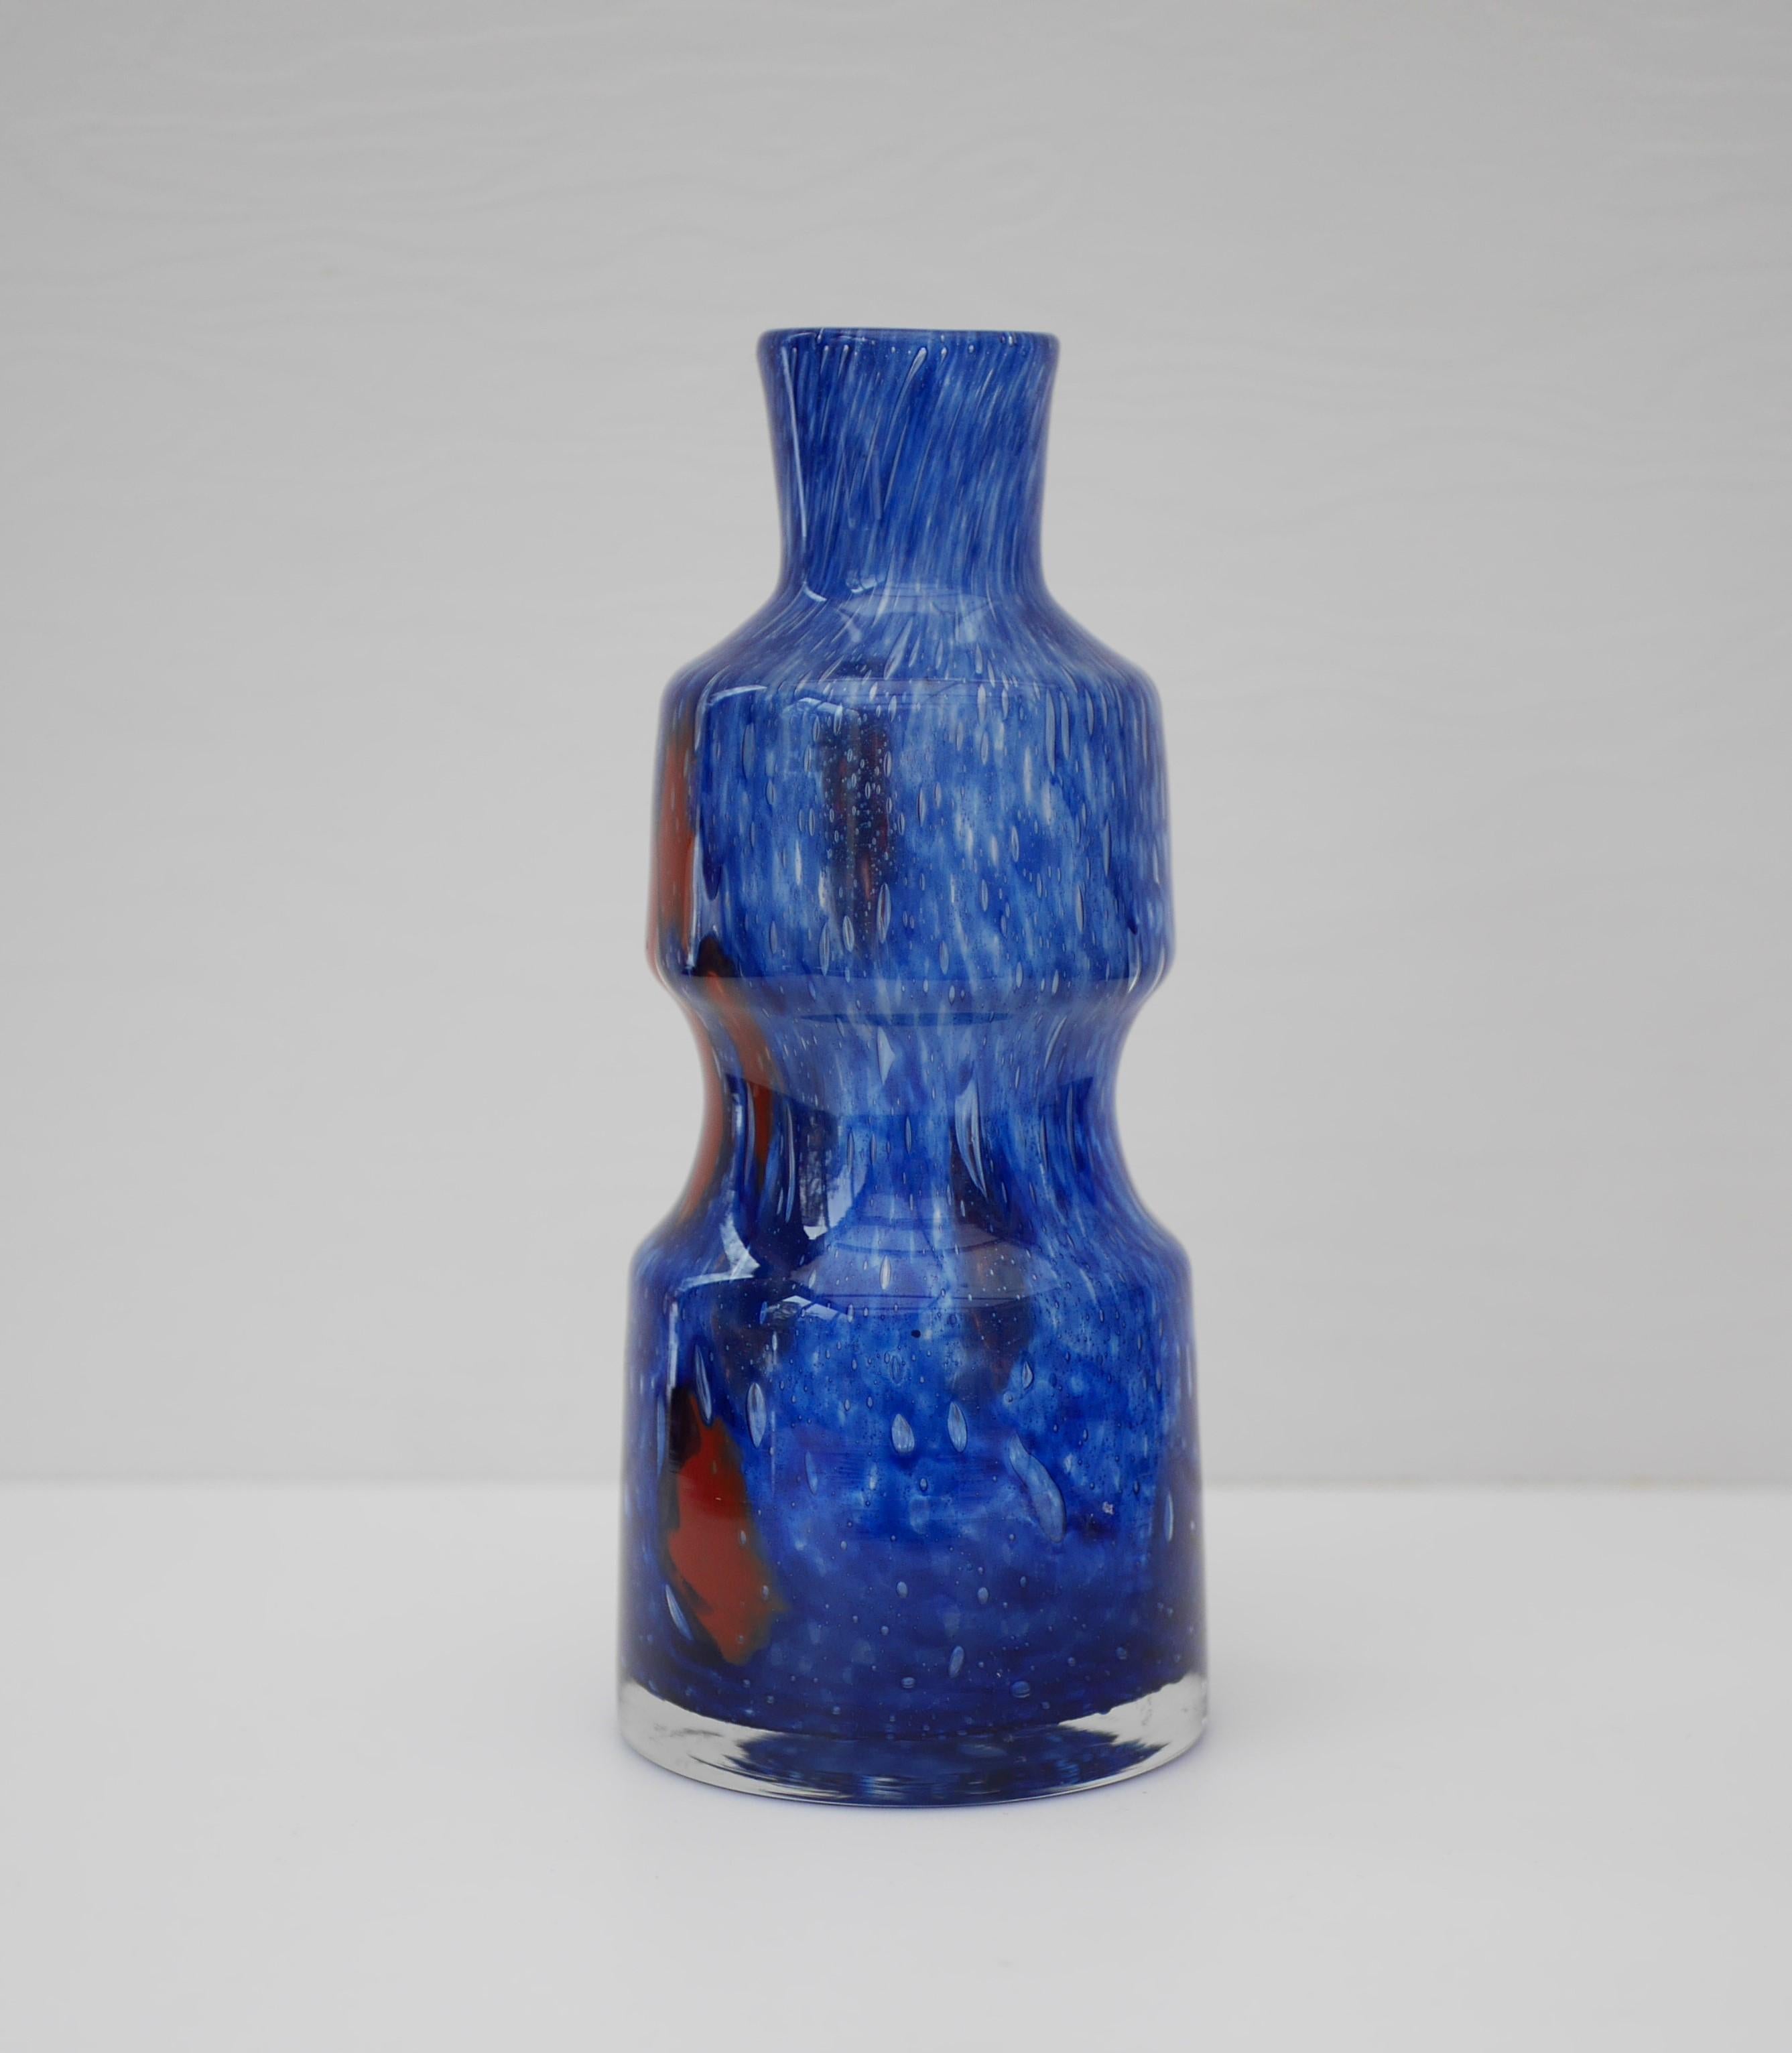 Stunning, iridescent blue glass 'Flora' vase with red details. Made by Frantisek Koudelka for Prachen, Czech Republic, 1970s. This is a rare piece.

From the Mid-Century but has a Bohemian design with air bubbles integrated into the colour flow.